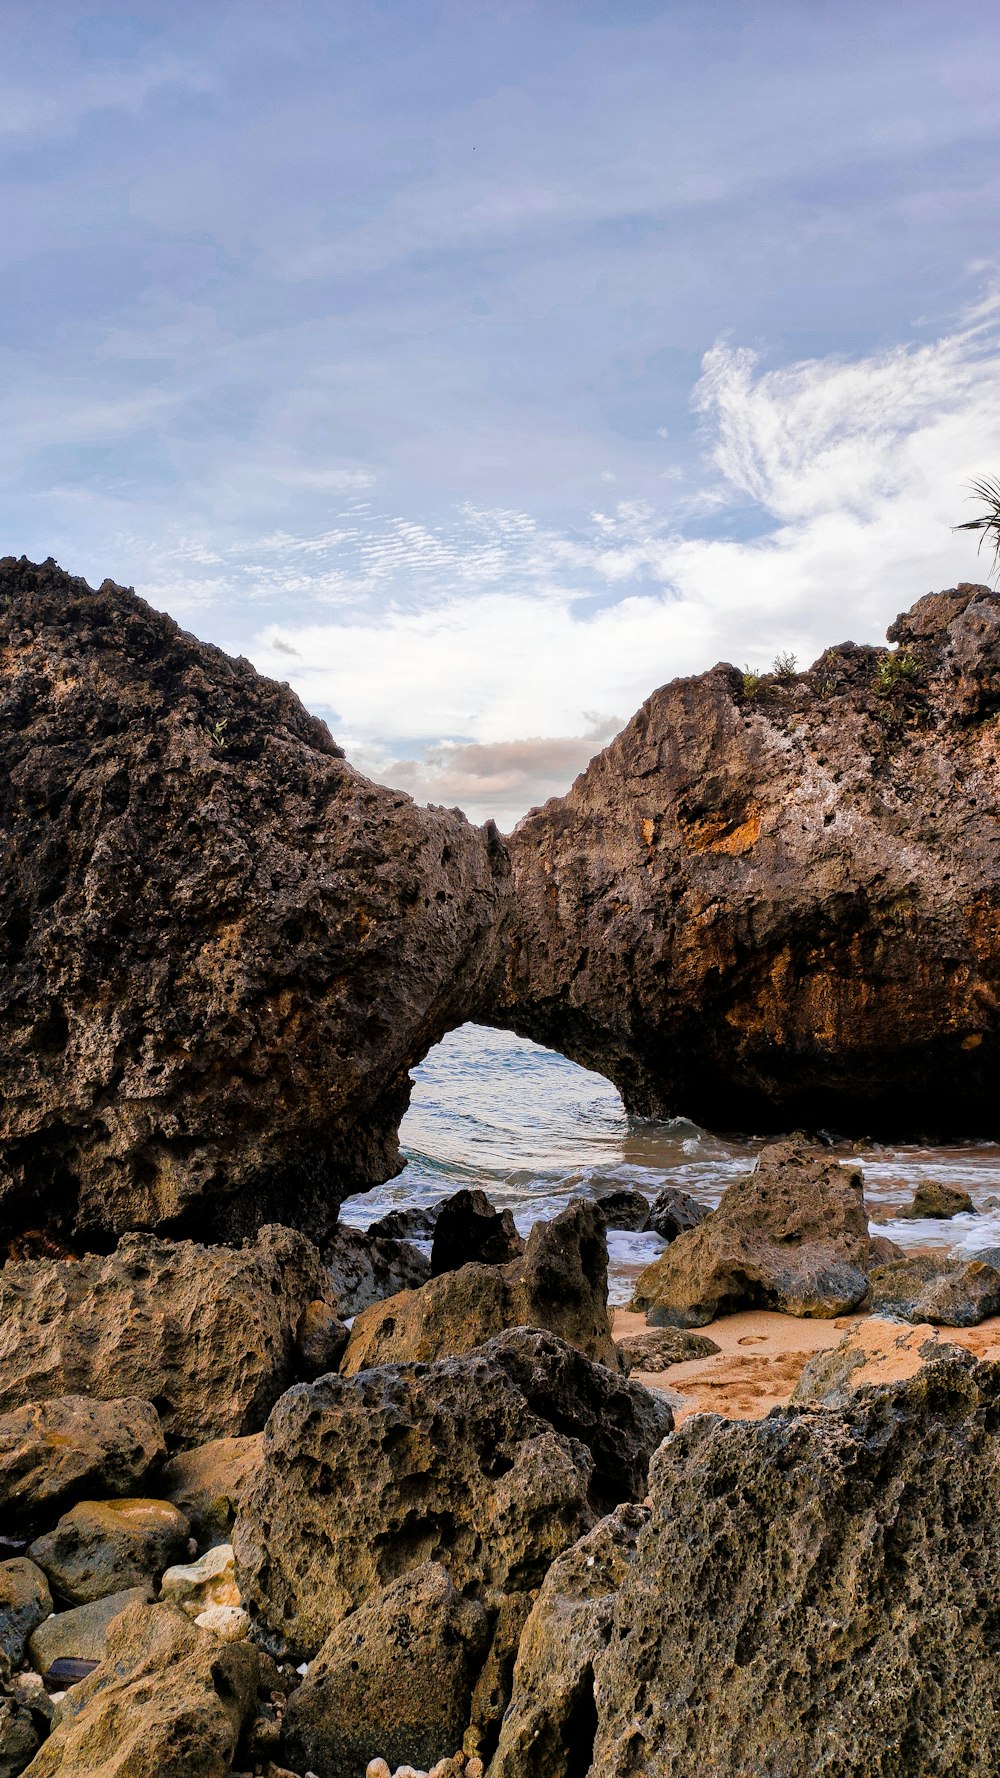 a rocky beach with a small arch in the middle of it